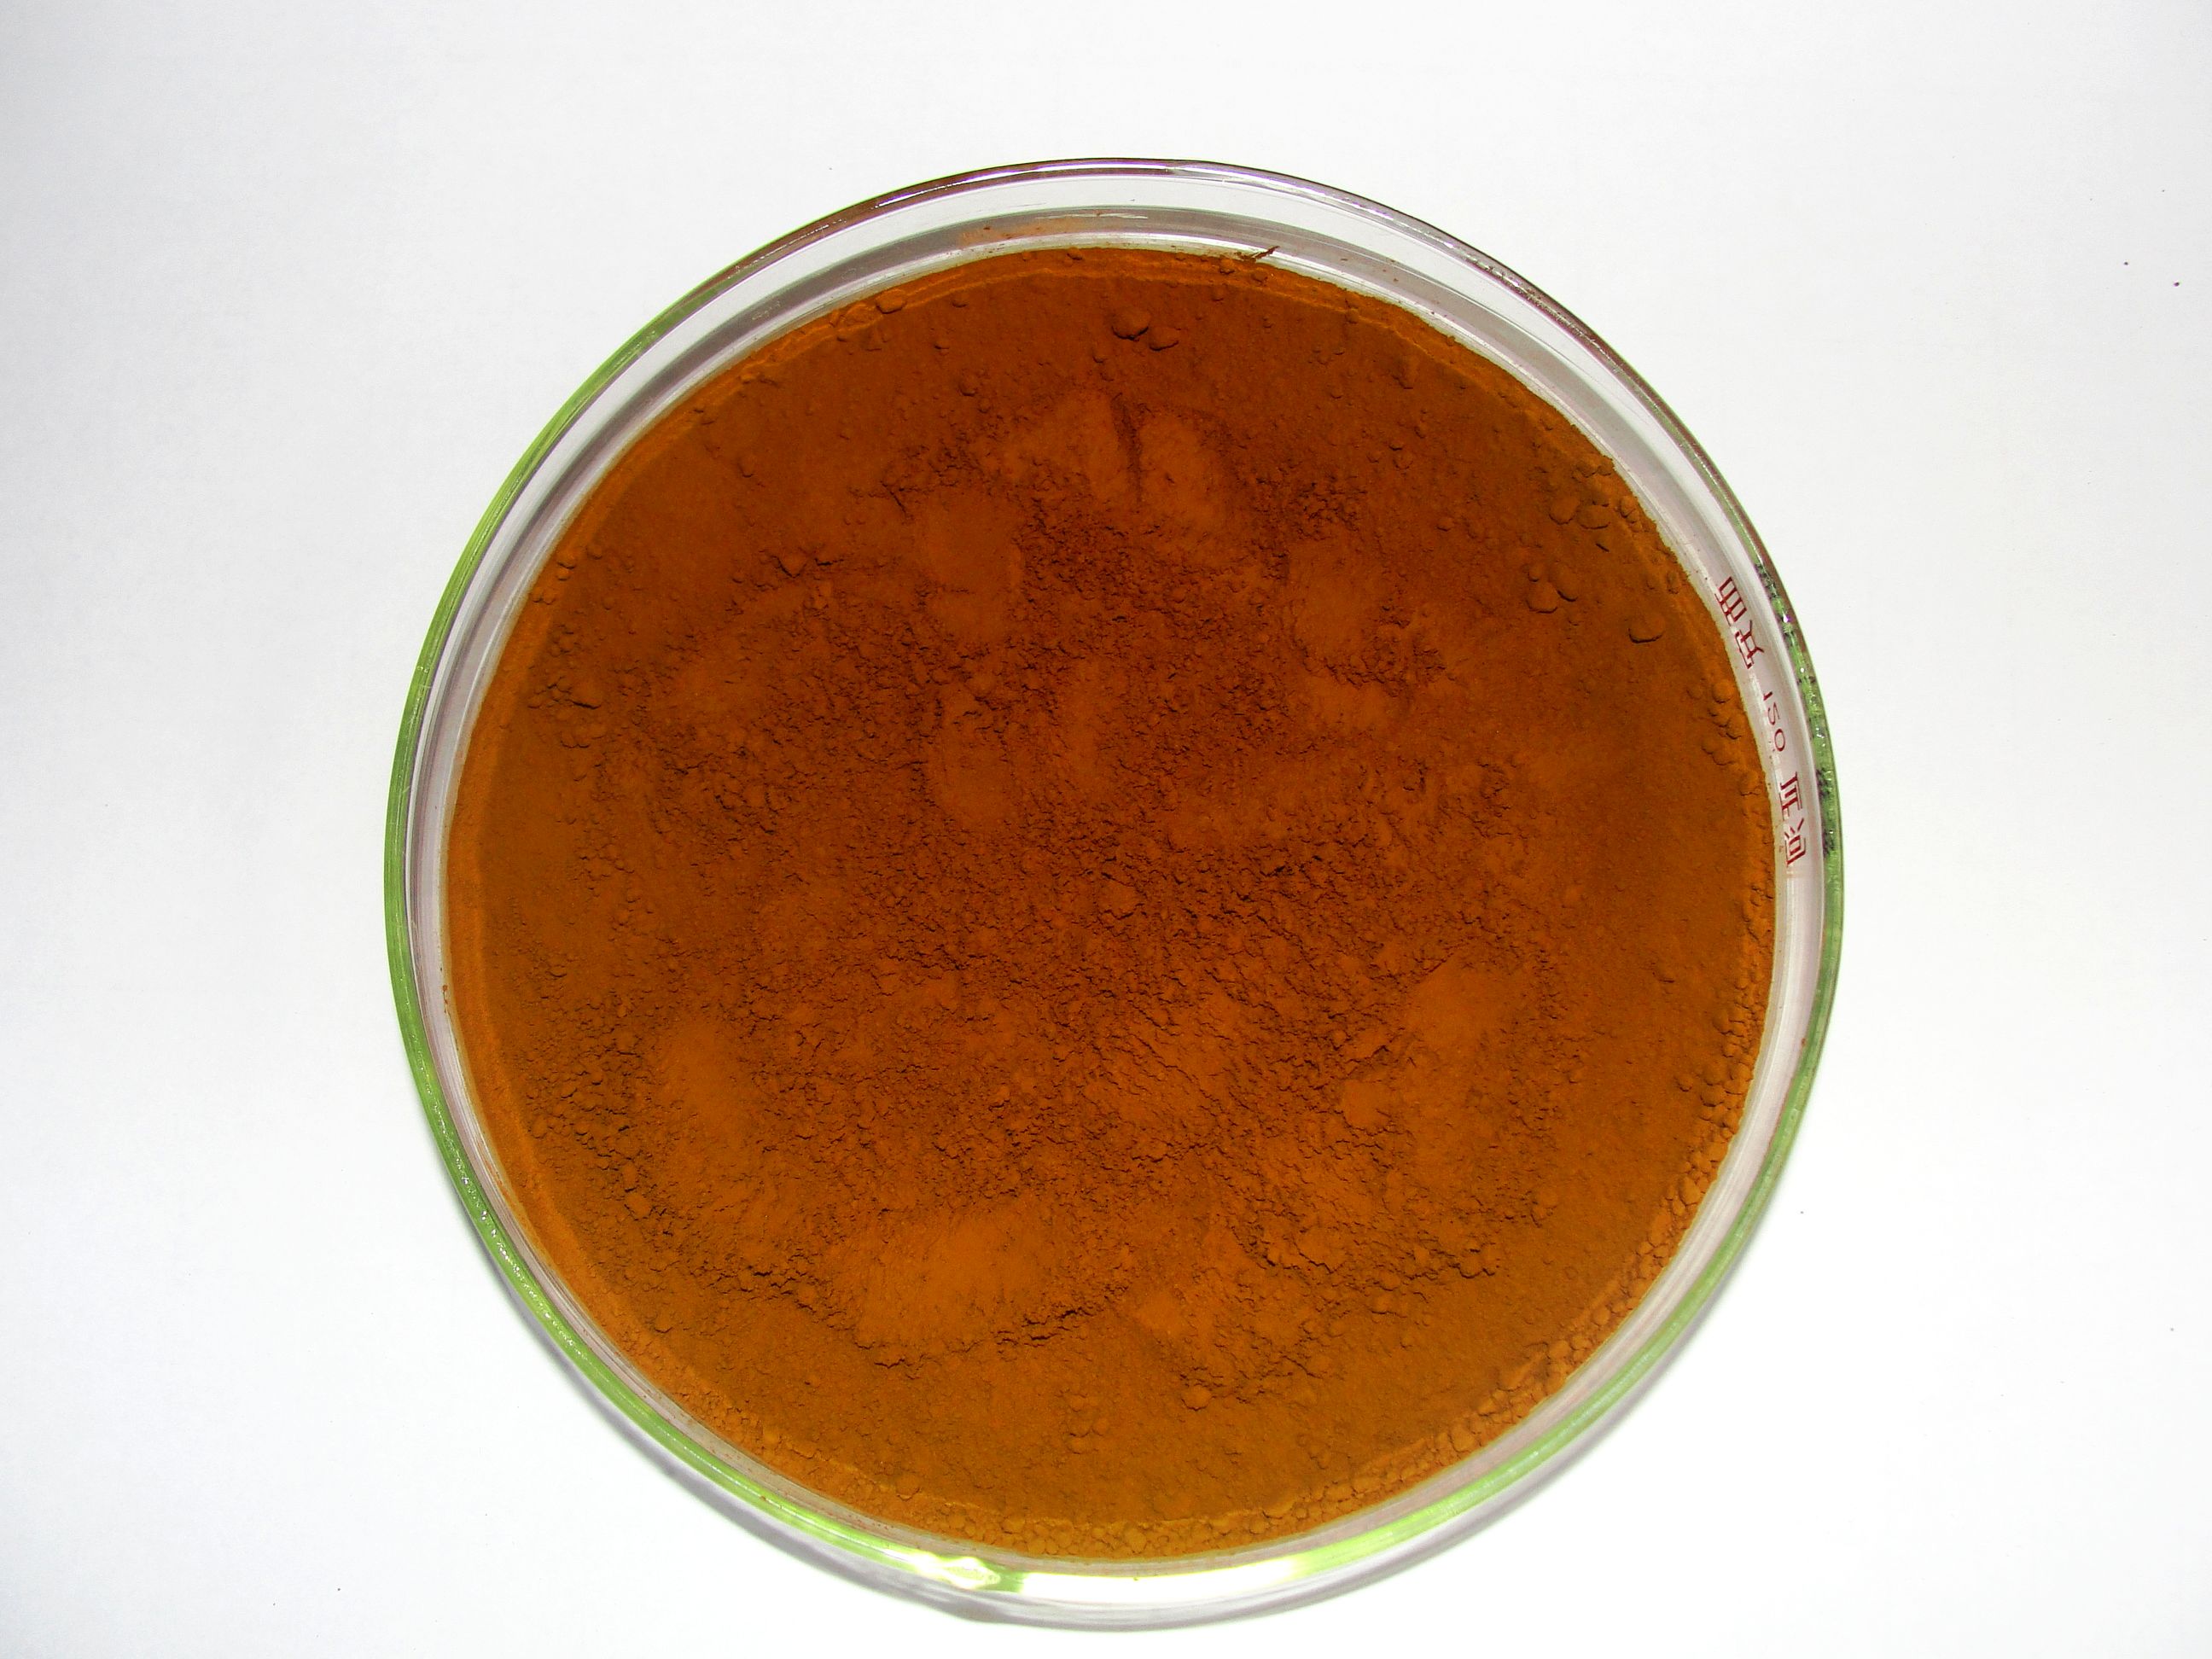 Pygeum Africanum Extract/phytosterol,Pygeum Africanum Extract/phytosterol